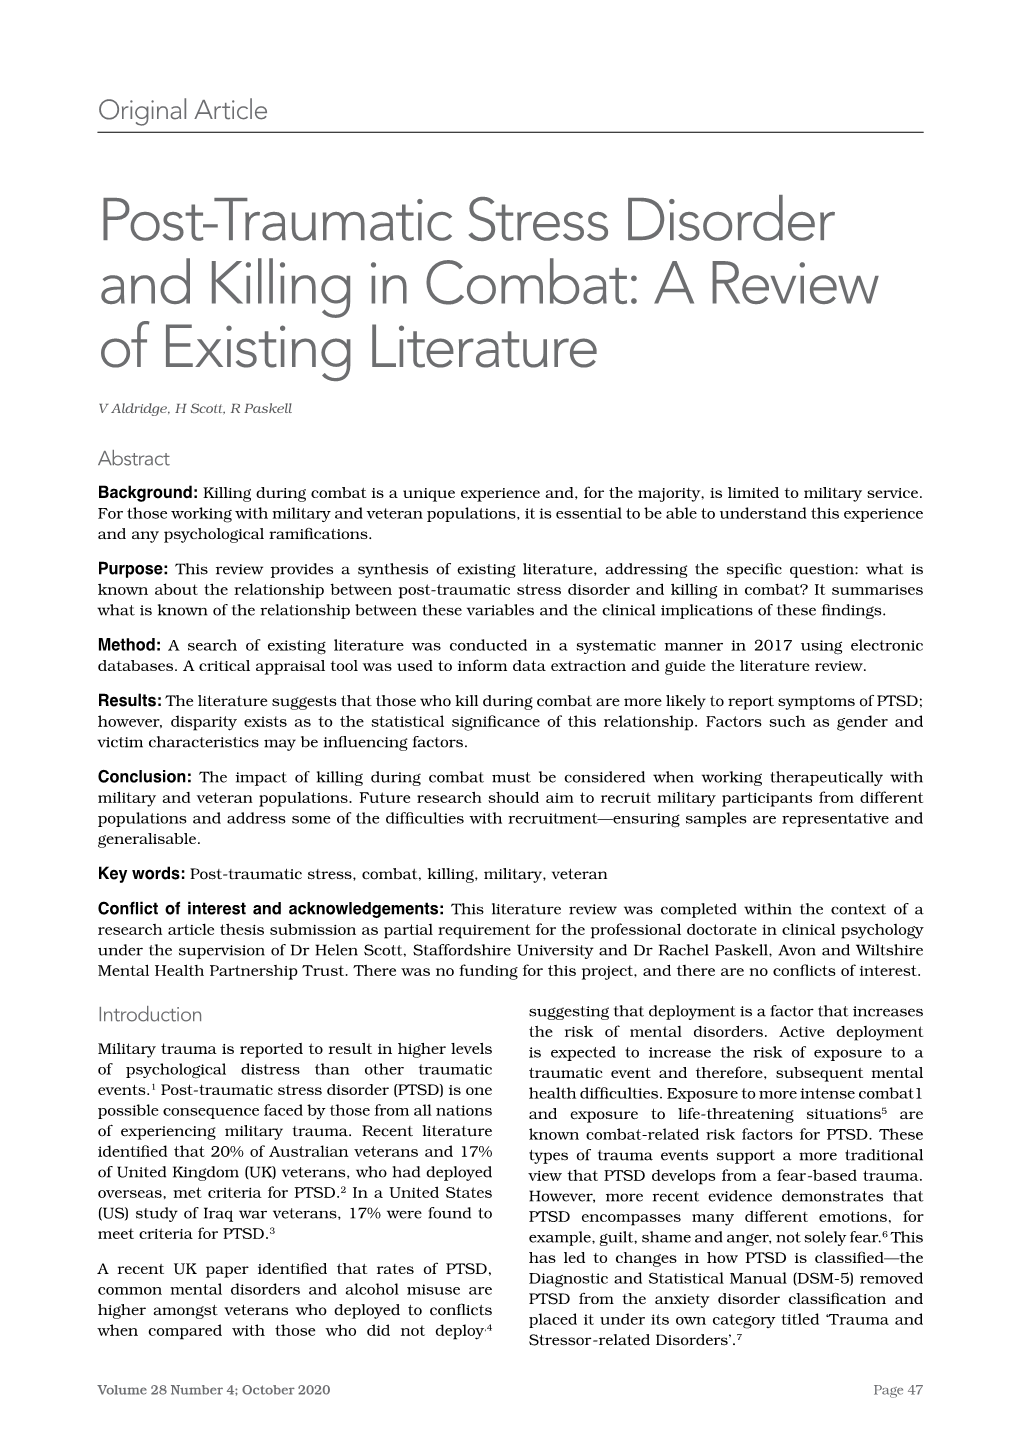 Post-Traumatic Stress Disorder and Killing in Combat: a Review of Existing Literature